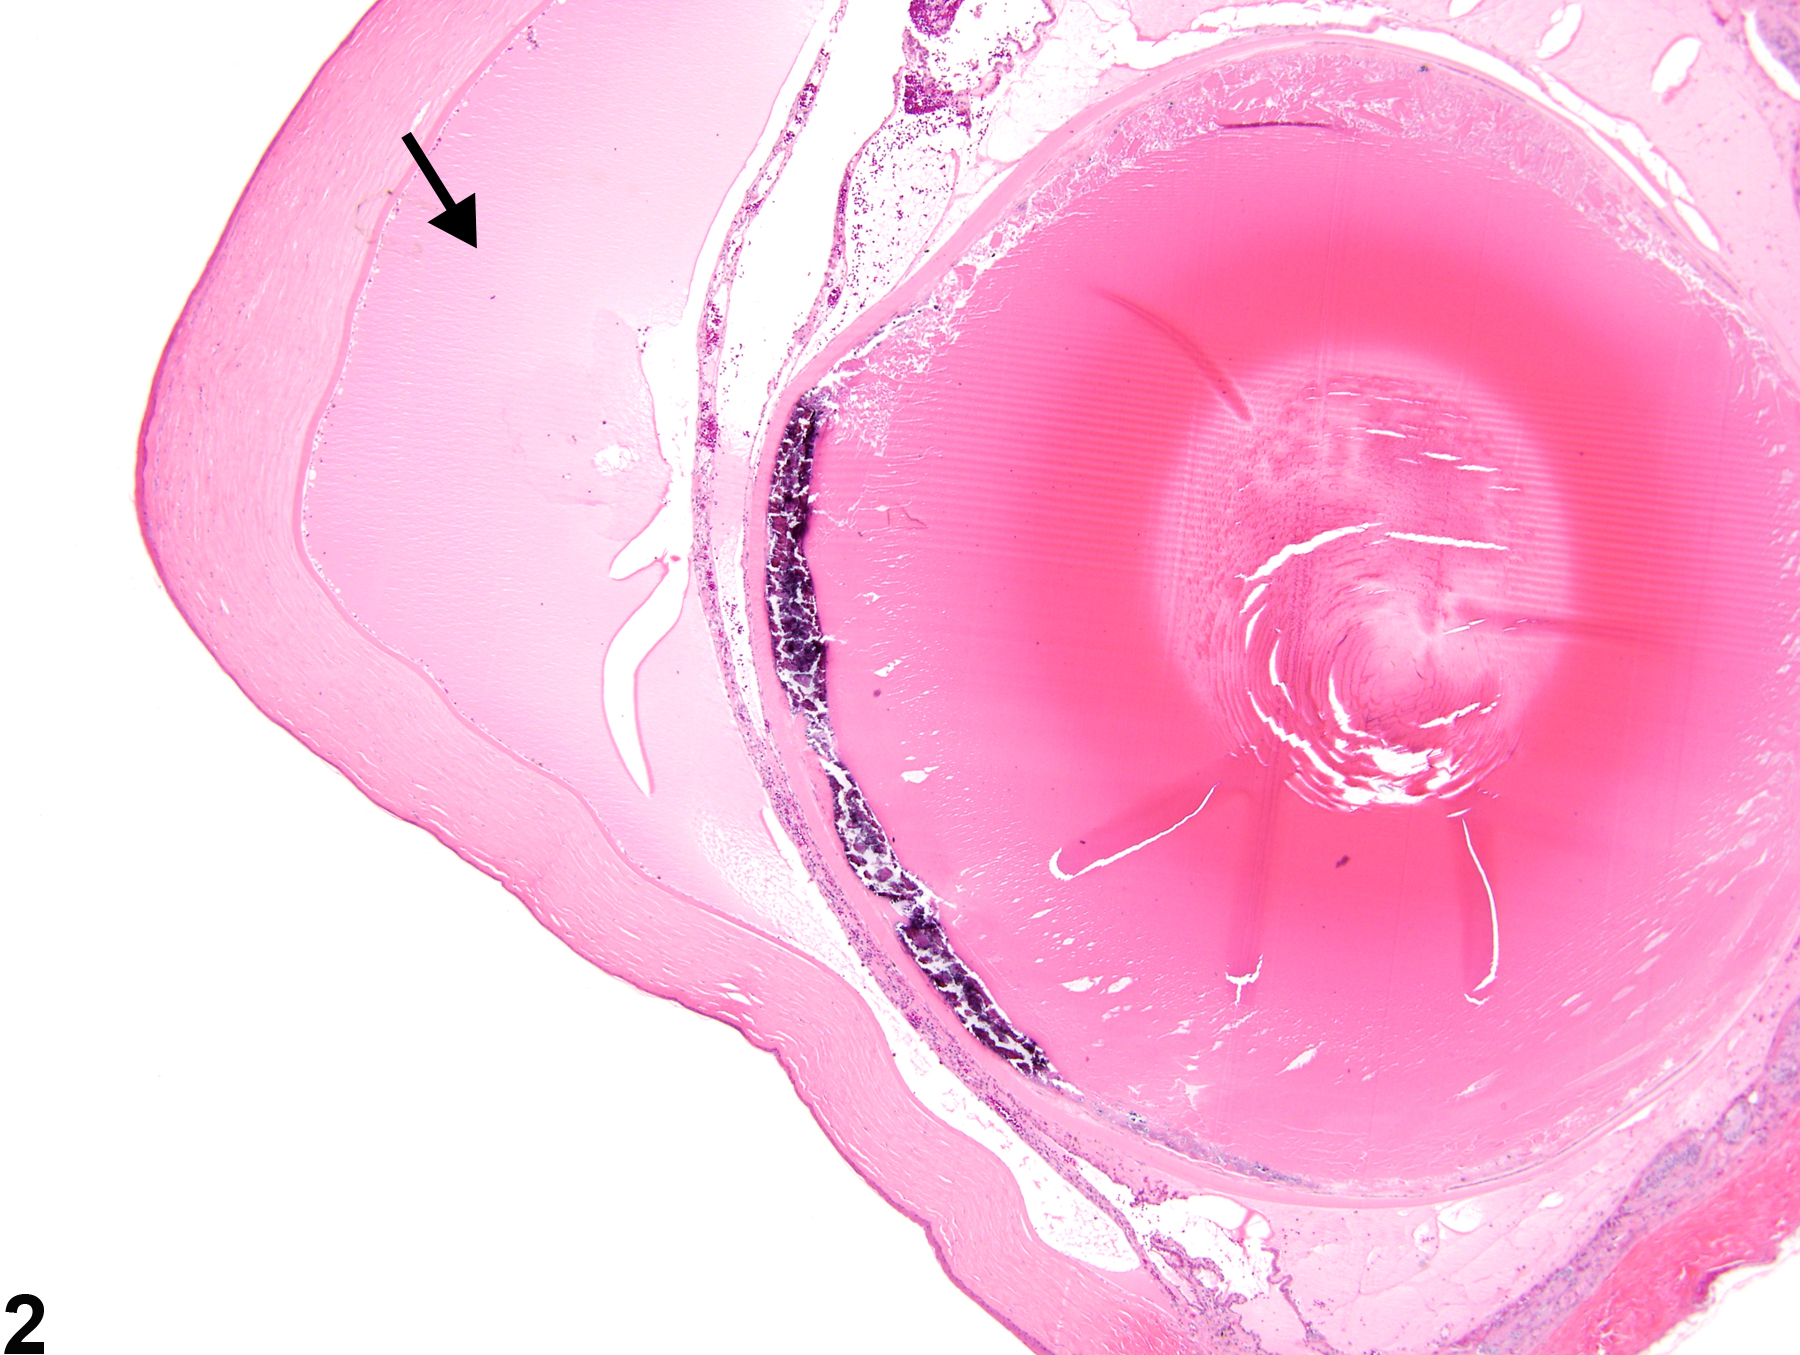 Image of anterior chamber proteinaceous fluid in the eye from a female F344/N rat in a chronic study